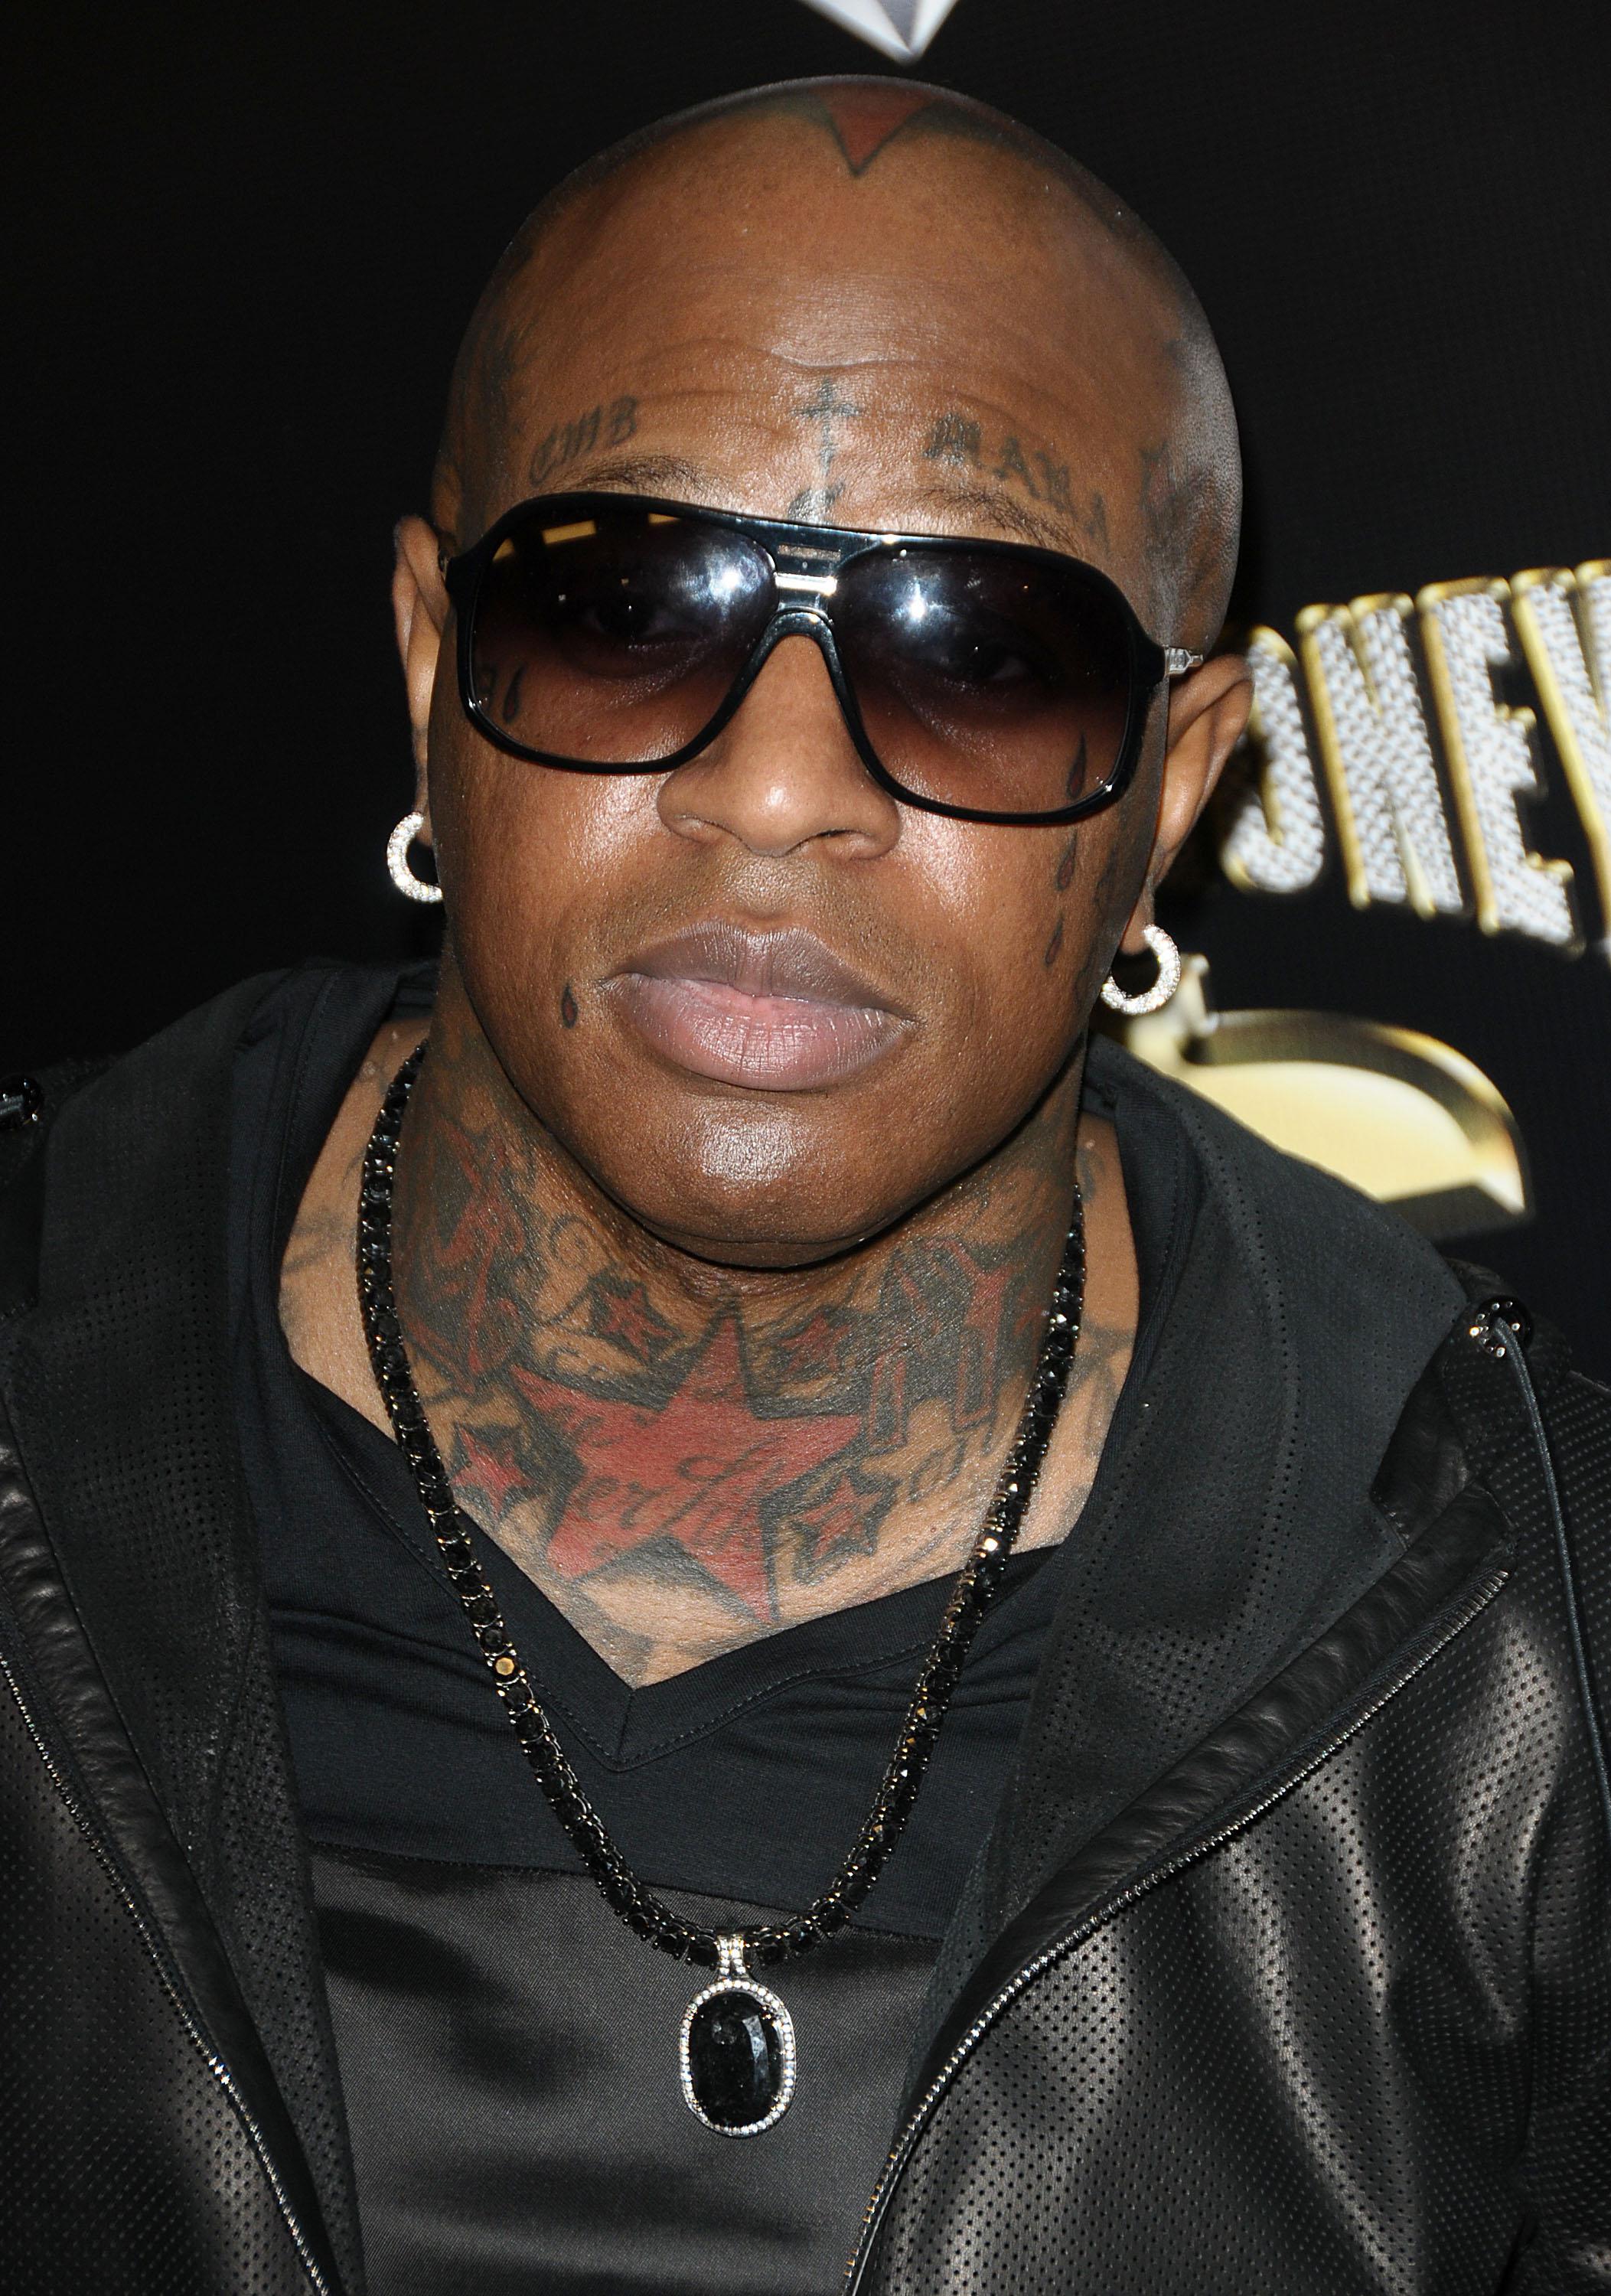 Birdman Defies His 52 Years Showing off His TattooCovered Body in This New  Photo